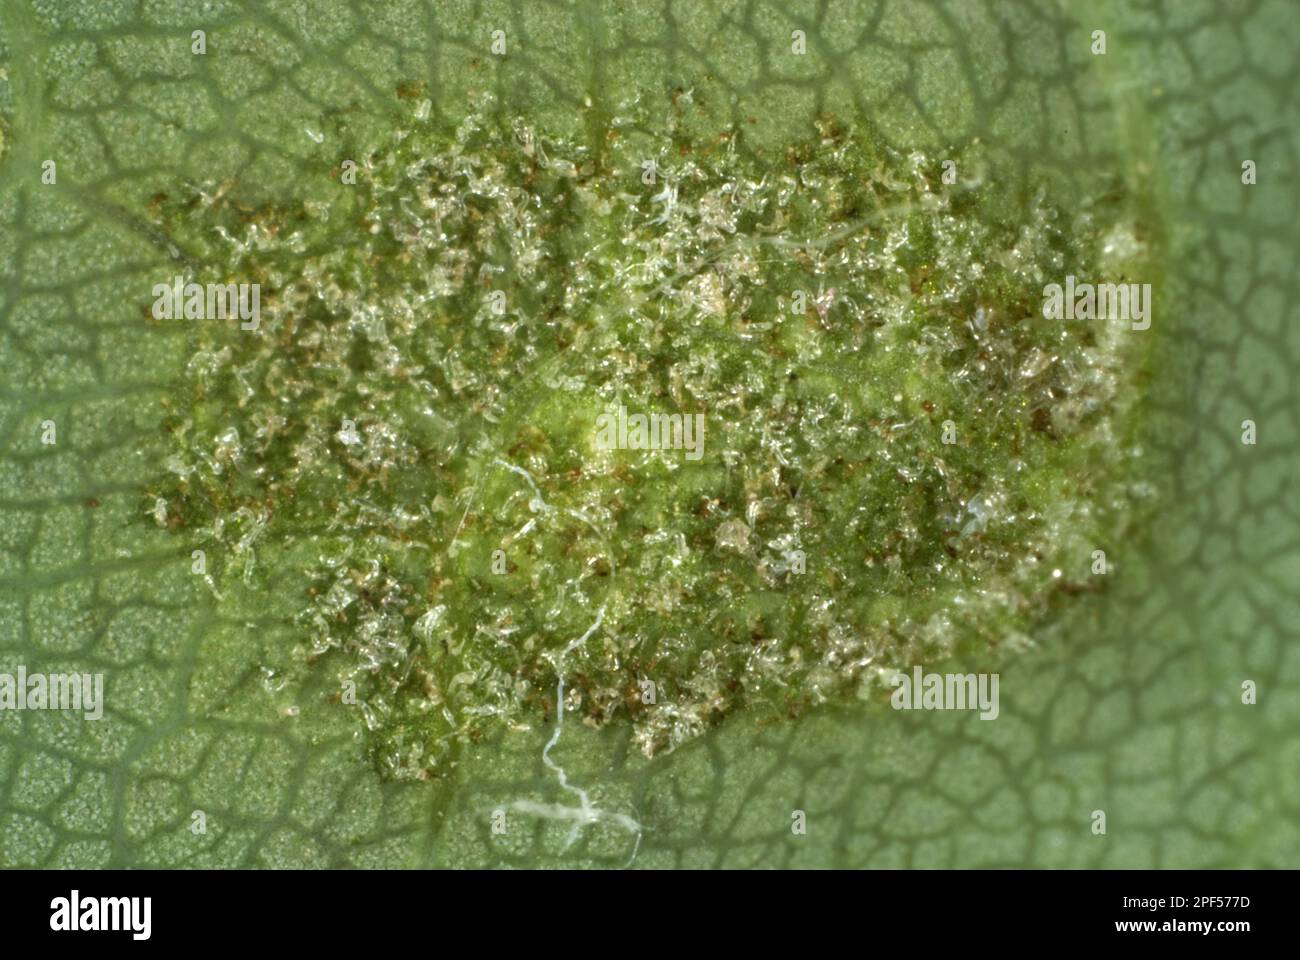 Colony of gall mites, Aceria pseudoplatani, on the underside of a sycamore leaf Stock Photo